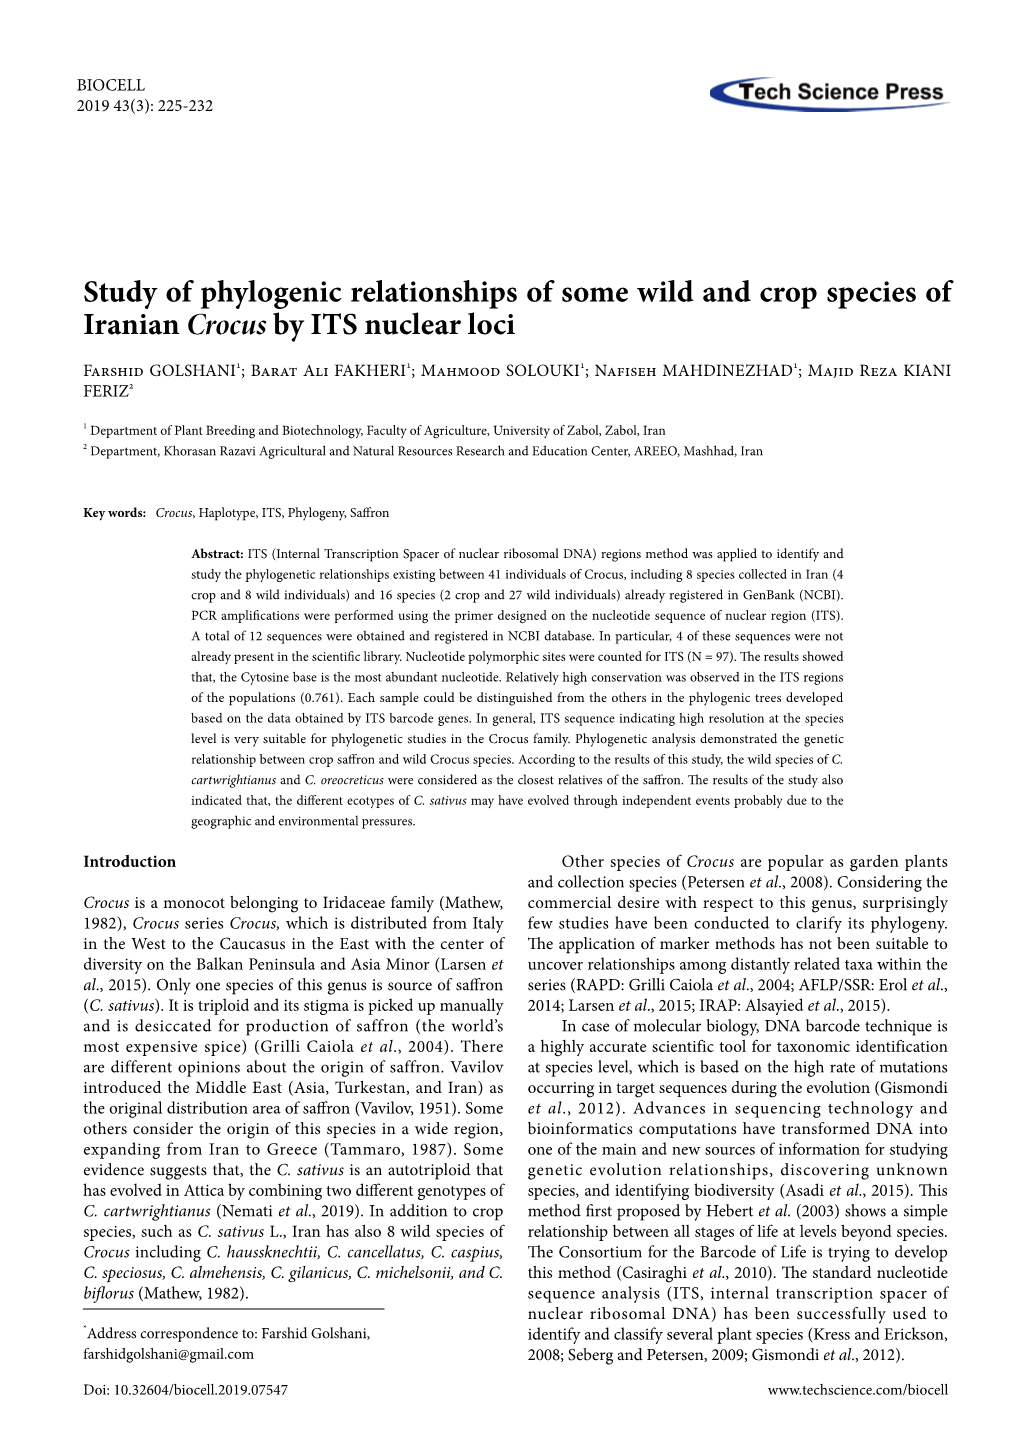 Study of Phylogenic Relationships of Some Wild and Crop Species of Iranian Crocus by ITS Nuclear Loci